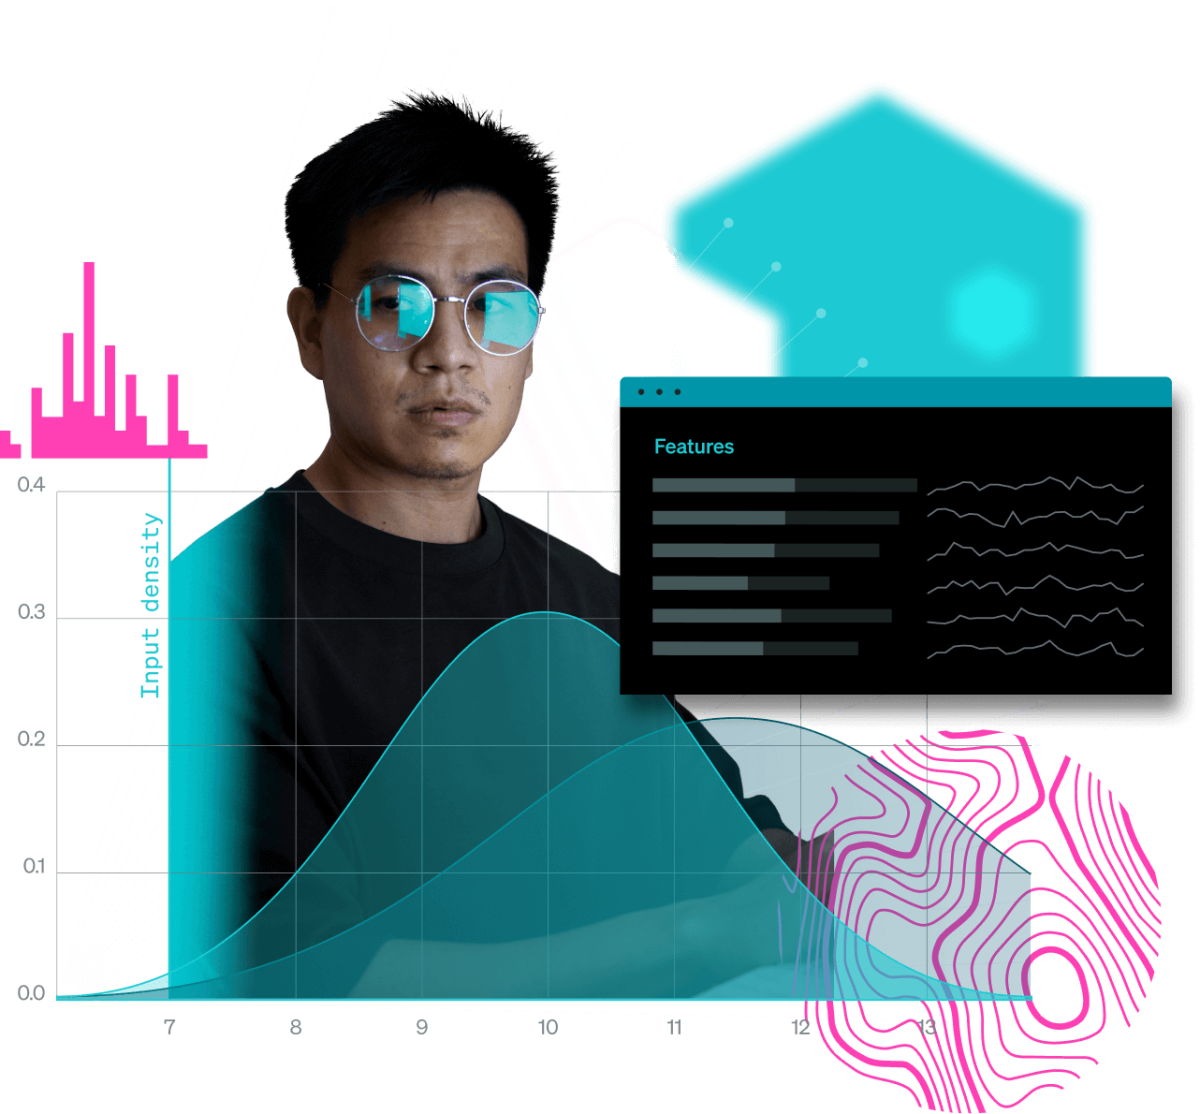 Man surrounded by data visualization design elements. 